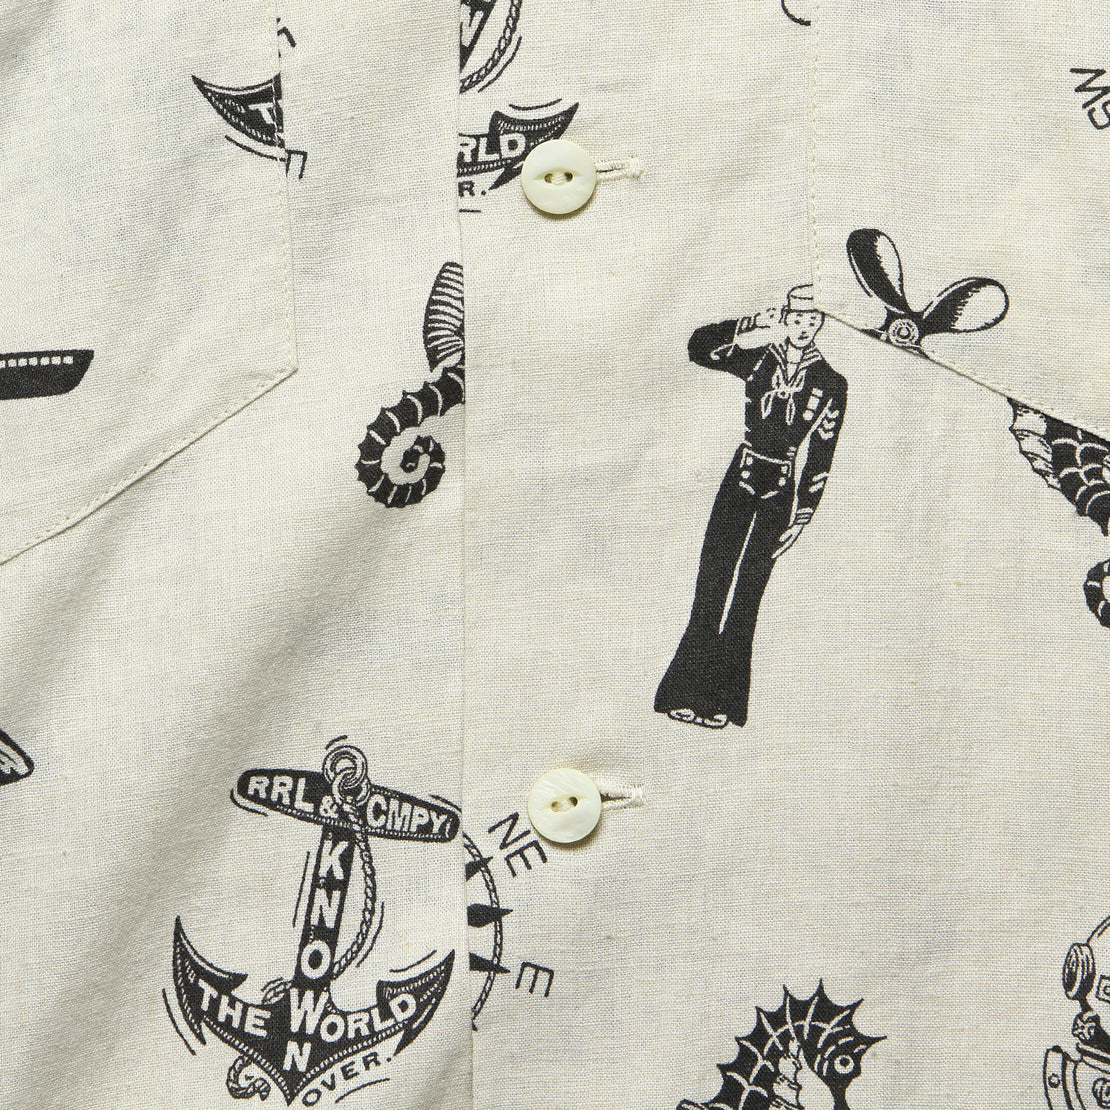 Nautical-Print Camp Shirt - Cream/Black - RRL - STAG Provisions - Tops - S/S Woven - Other Pattern